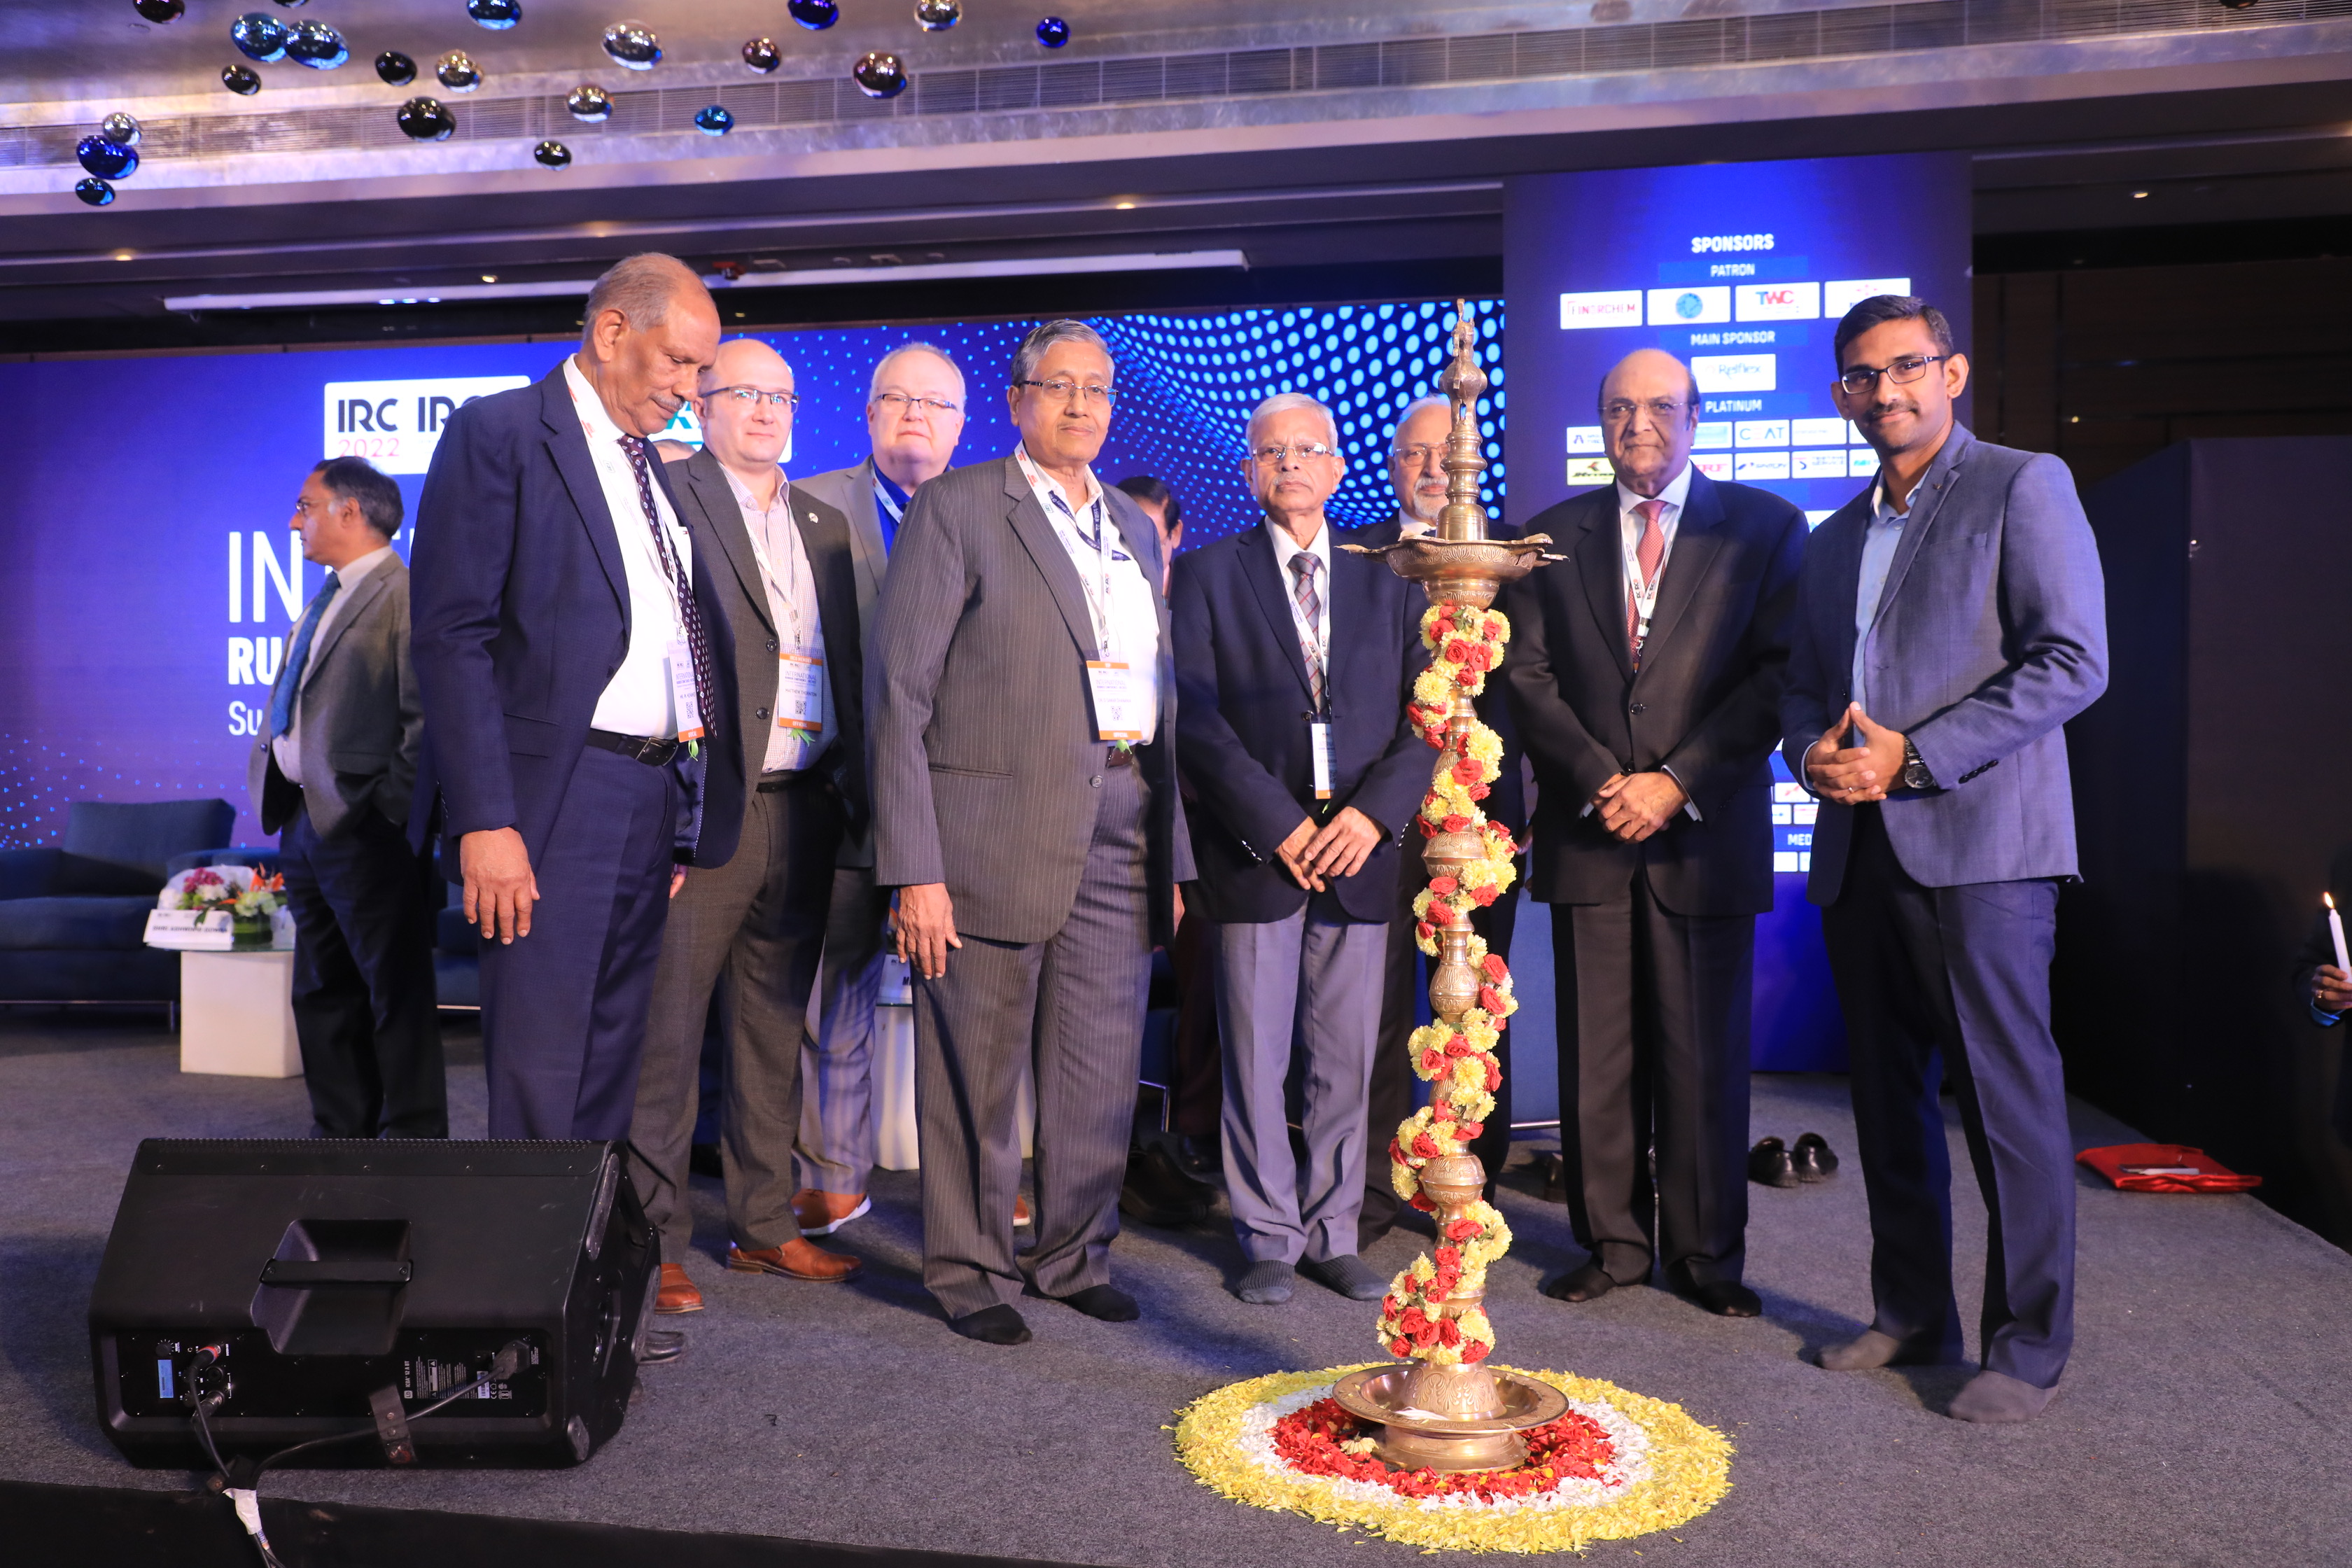 IRC 2022 organized by Indian Rubber institute was held on 24th November 2022 at Hotel Sheraton Grande, Bengaluru.